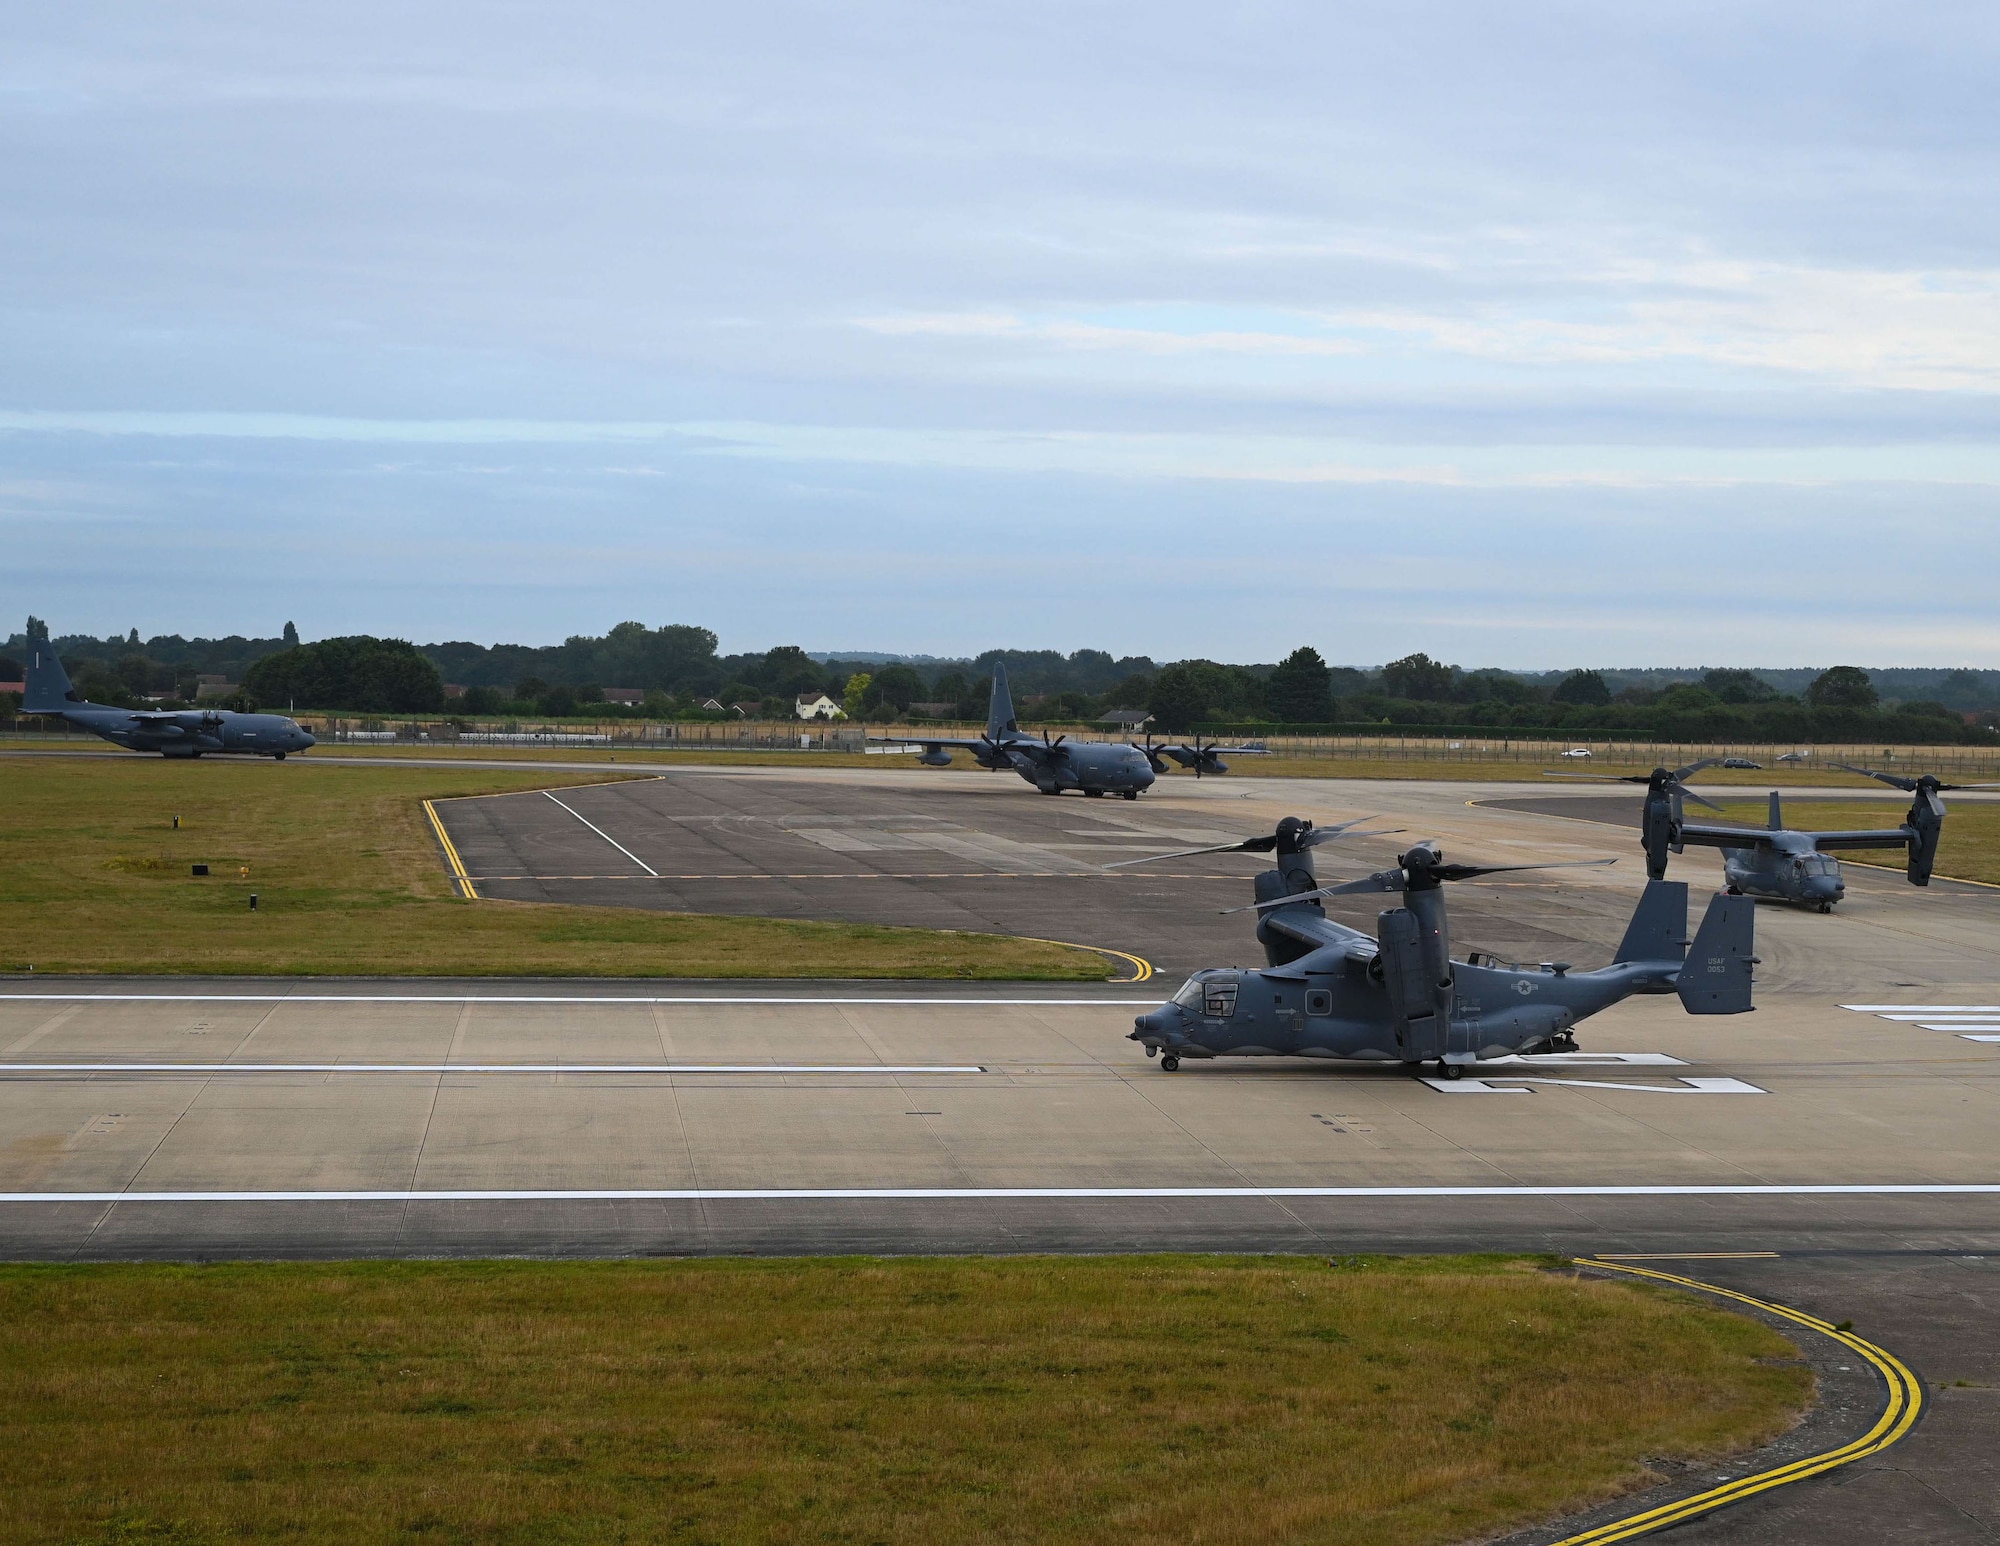 A CV-22 Osprey and two MC-130J Commando II aircraft taxi onto the runway as they prepare to lead the elephant walk at Royal Air Force Mildenhall, England, Sept. 13, 2021. An elephant walk is a term used by the U.S. Air Force when multiple aircraft taxi together before takeoff. (U.S. Air Force photo by Airman 1st Class Viviam Chiu).